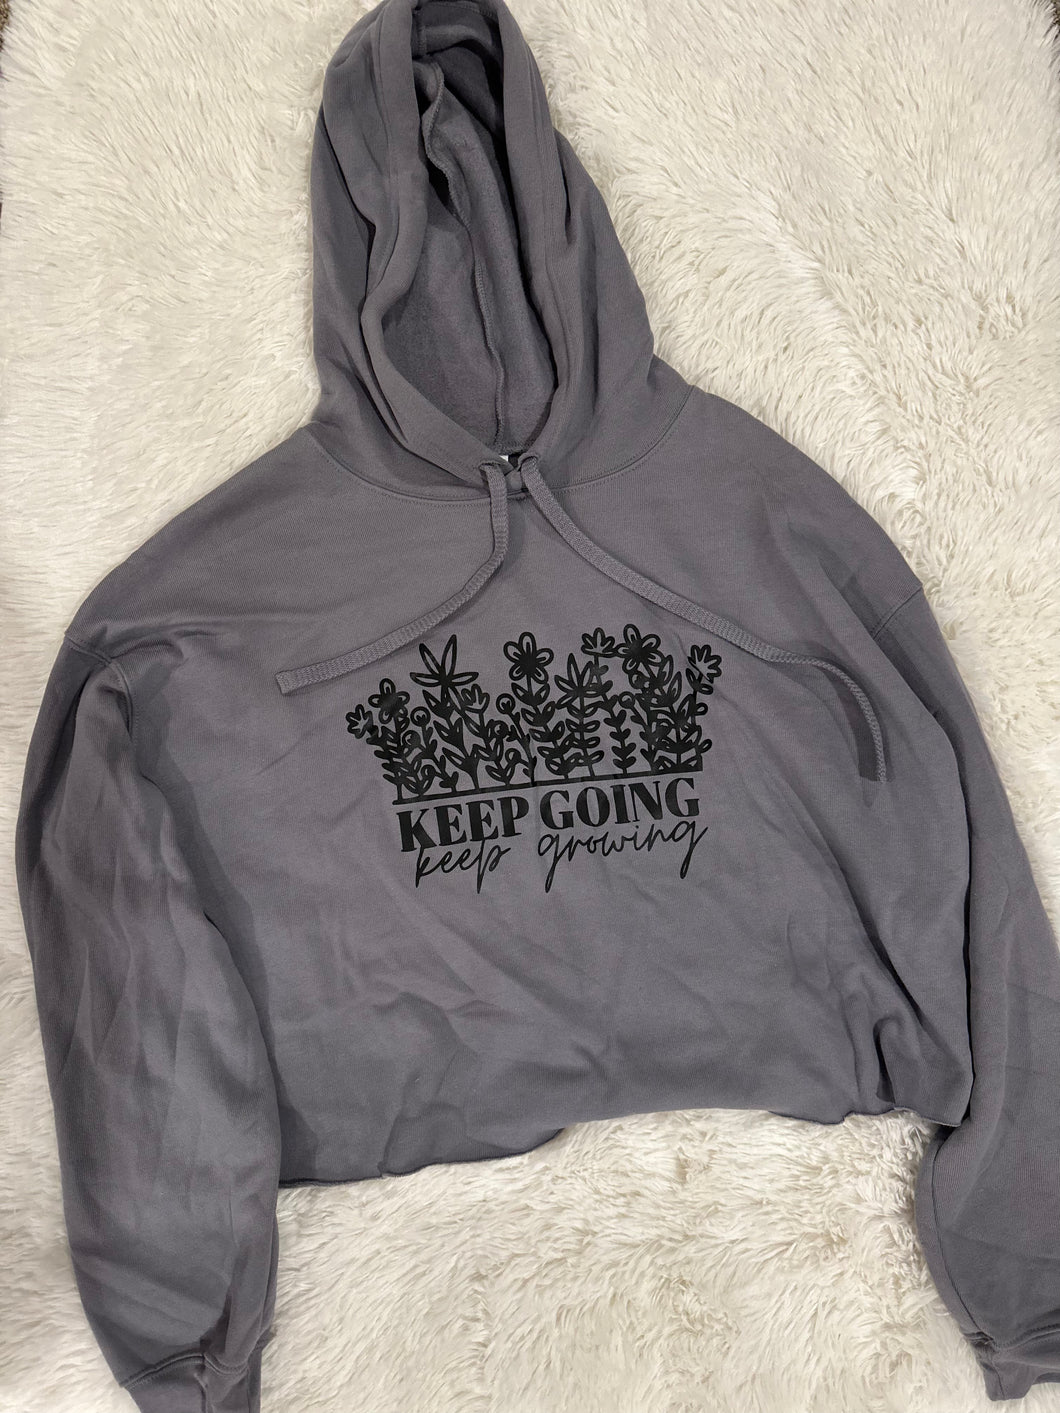 Keep Going, Keep Growing Cropped Hoodie - SIZE LARGE